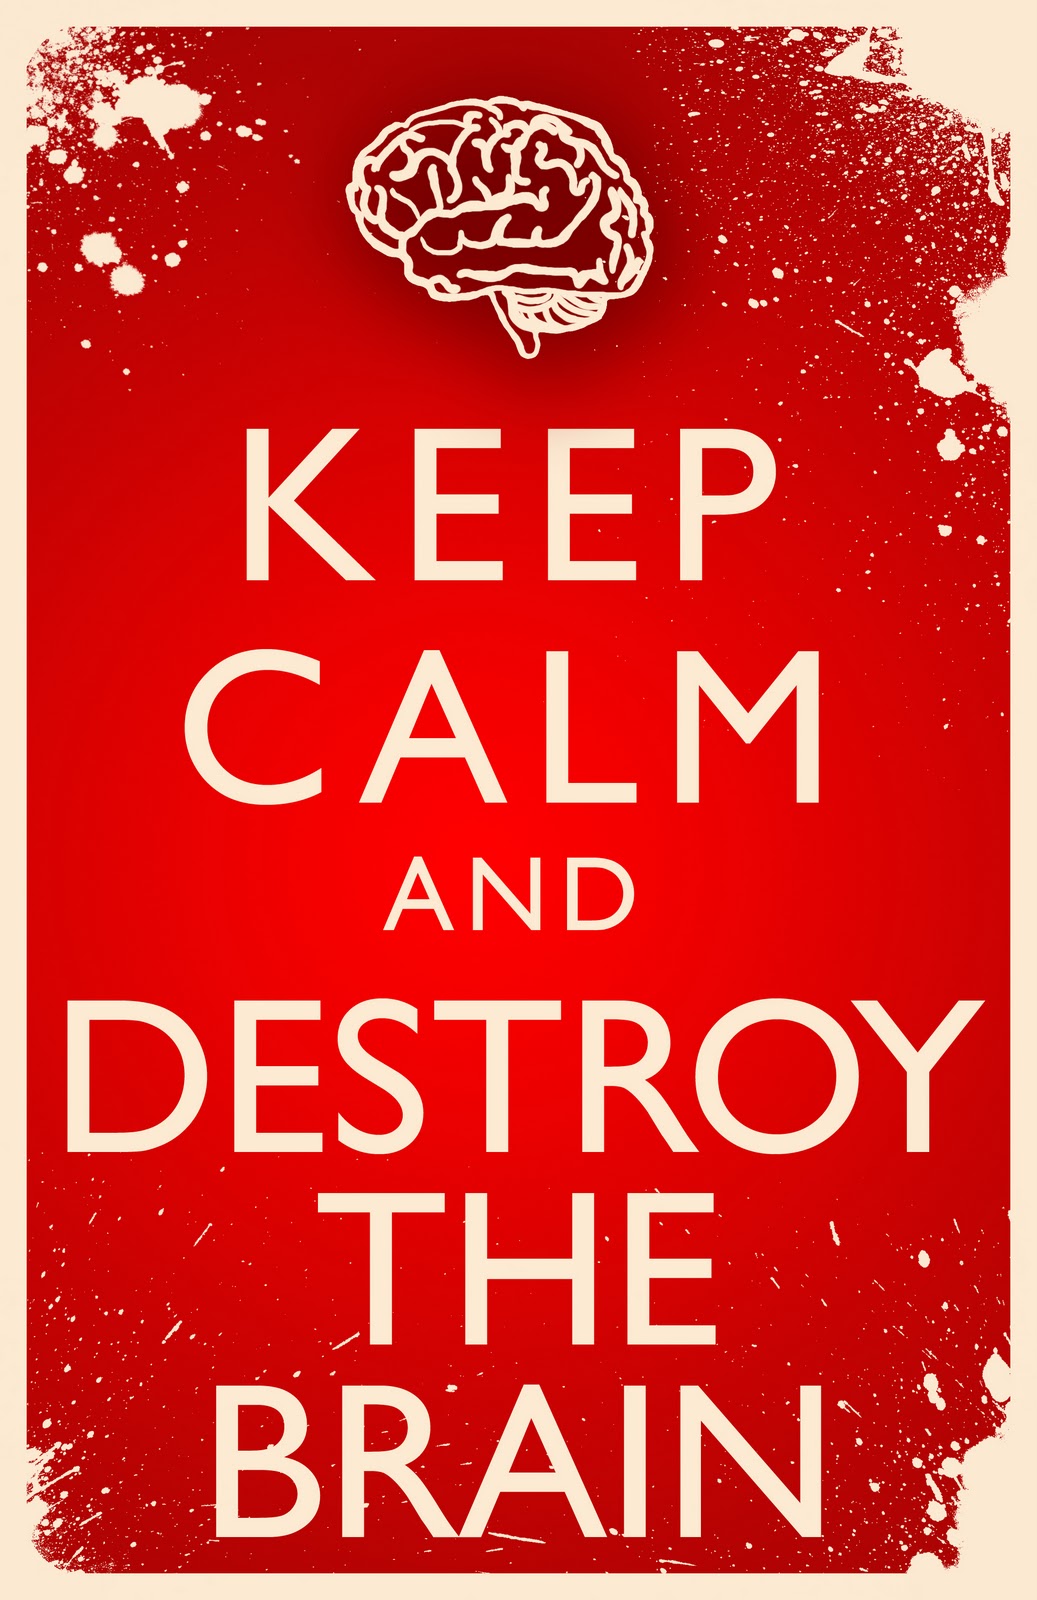 Keep Calm and Destroy The Brain HD Wallpaper 440